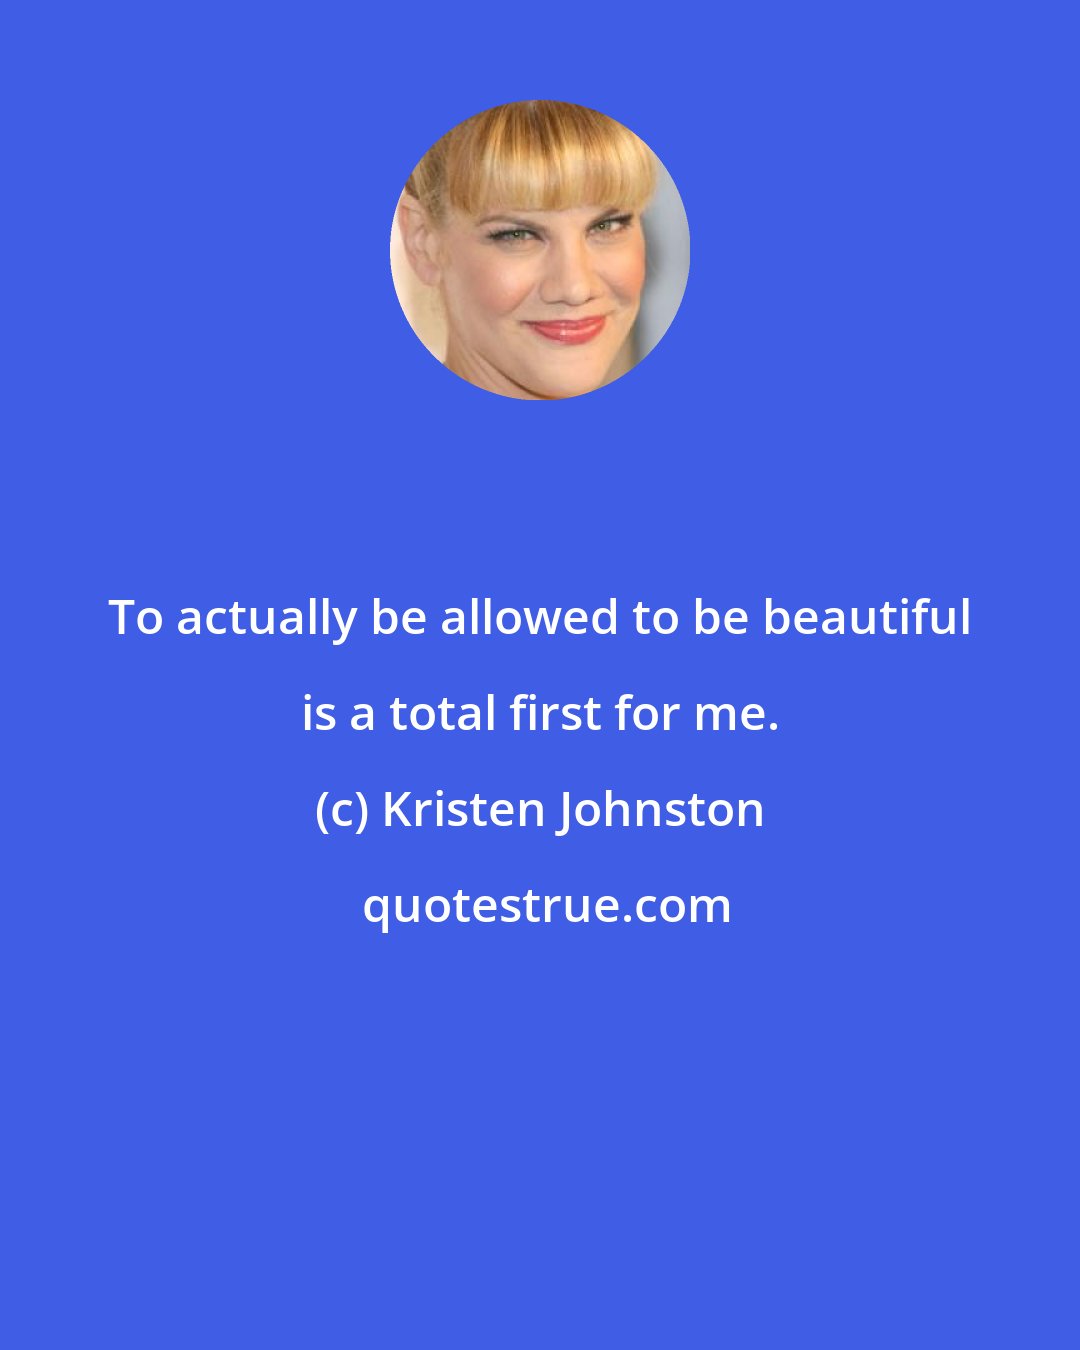 Kristen Johnston: To actually be allowed to be beautiful is a total first for me.